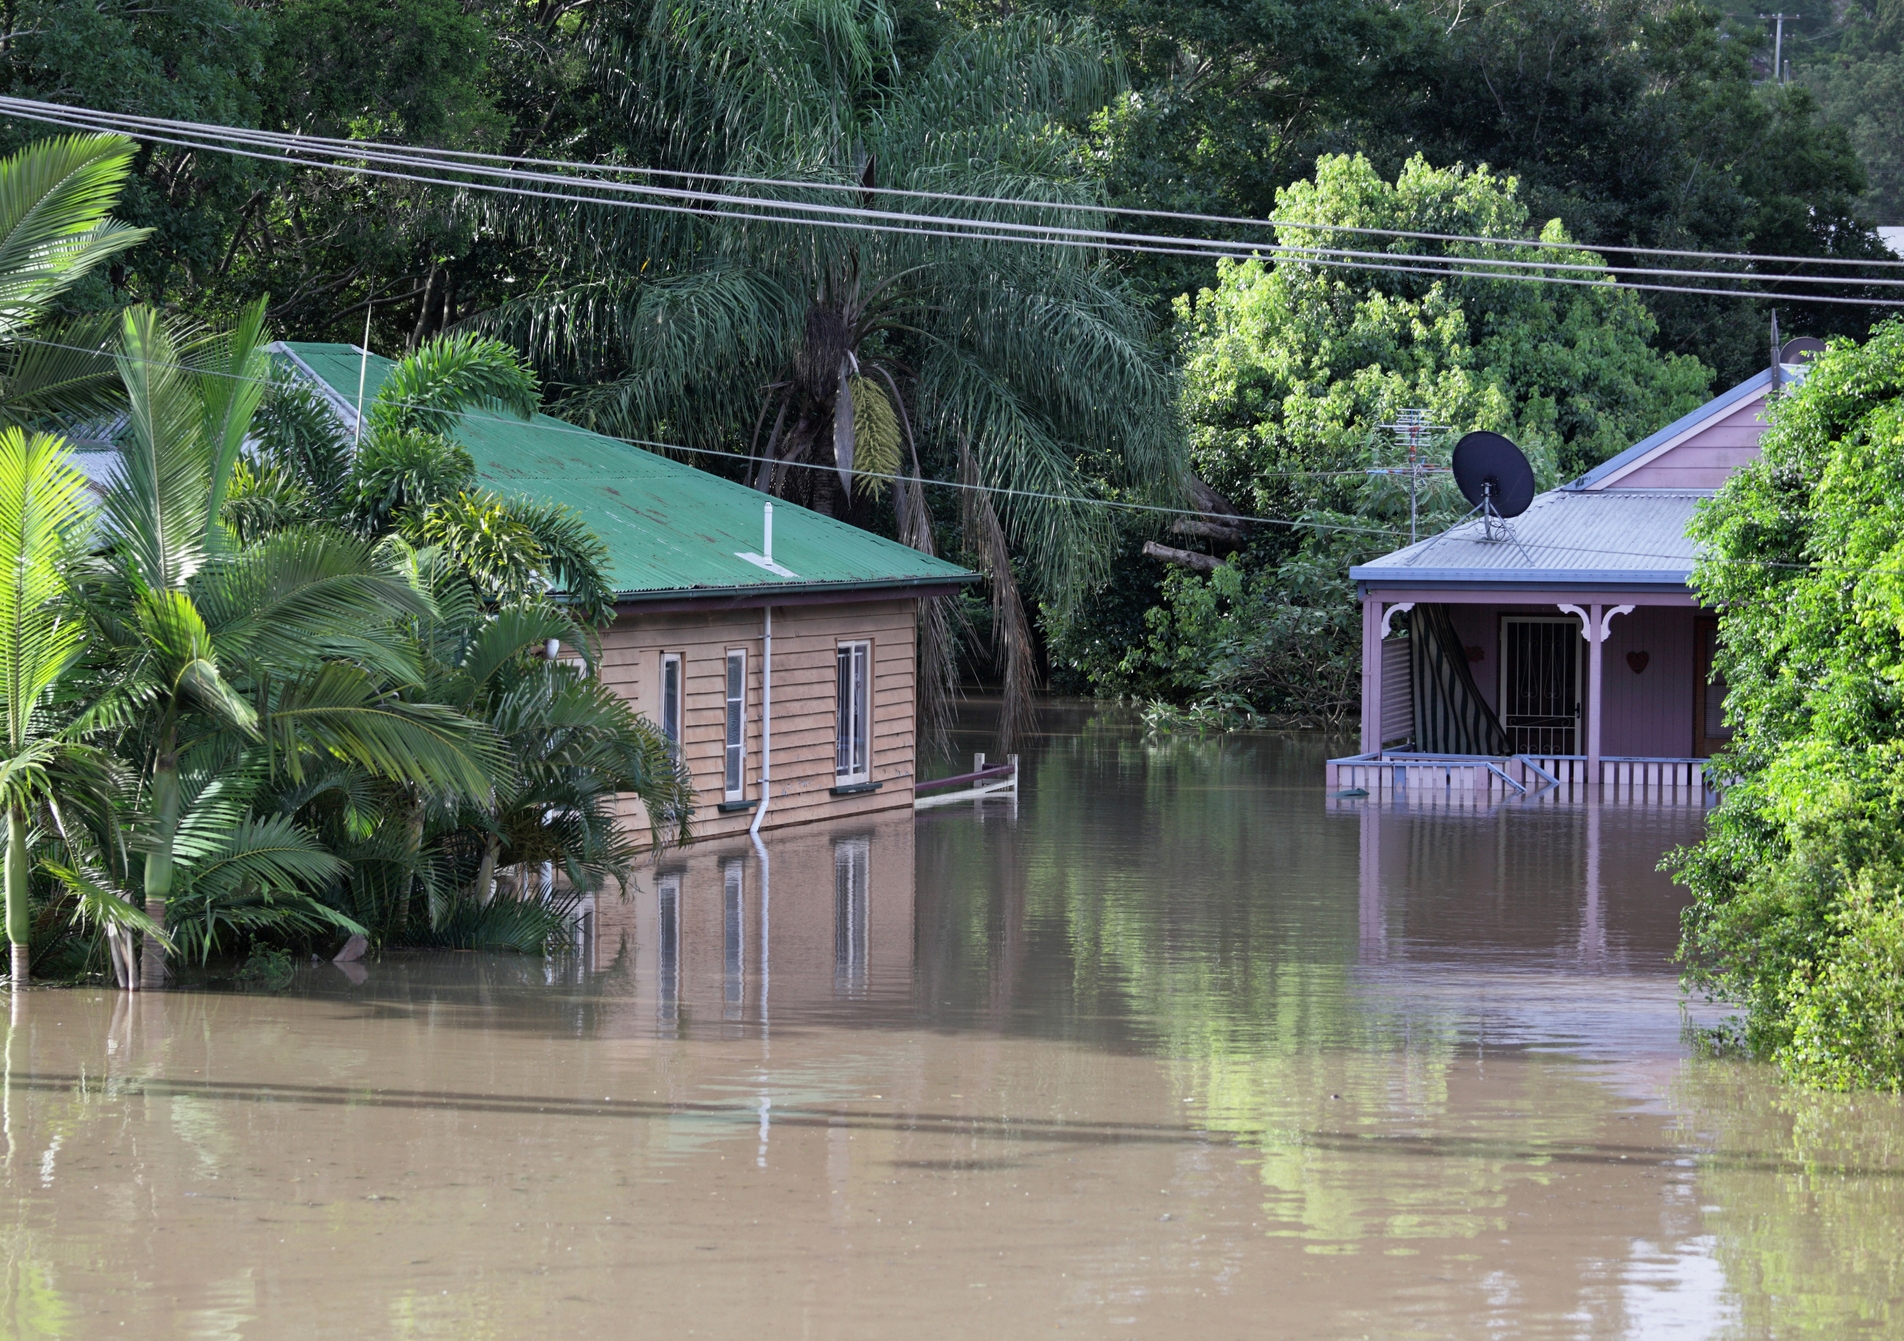 Two classic Queenslander style houses are flooded in Brisbane, Australia.